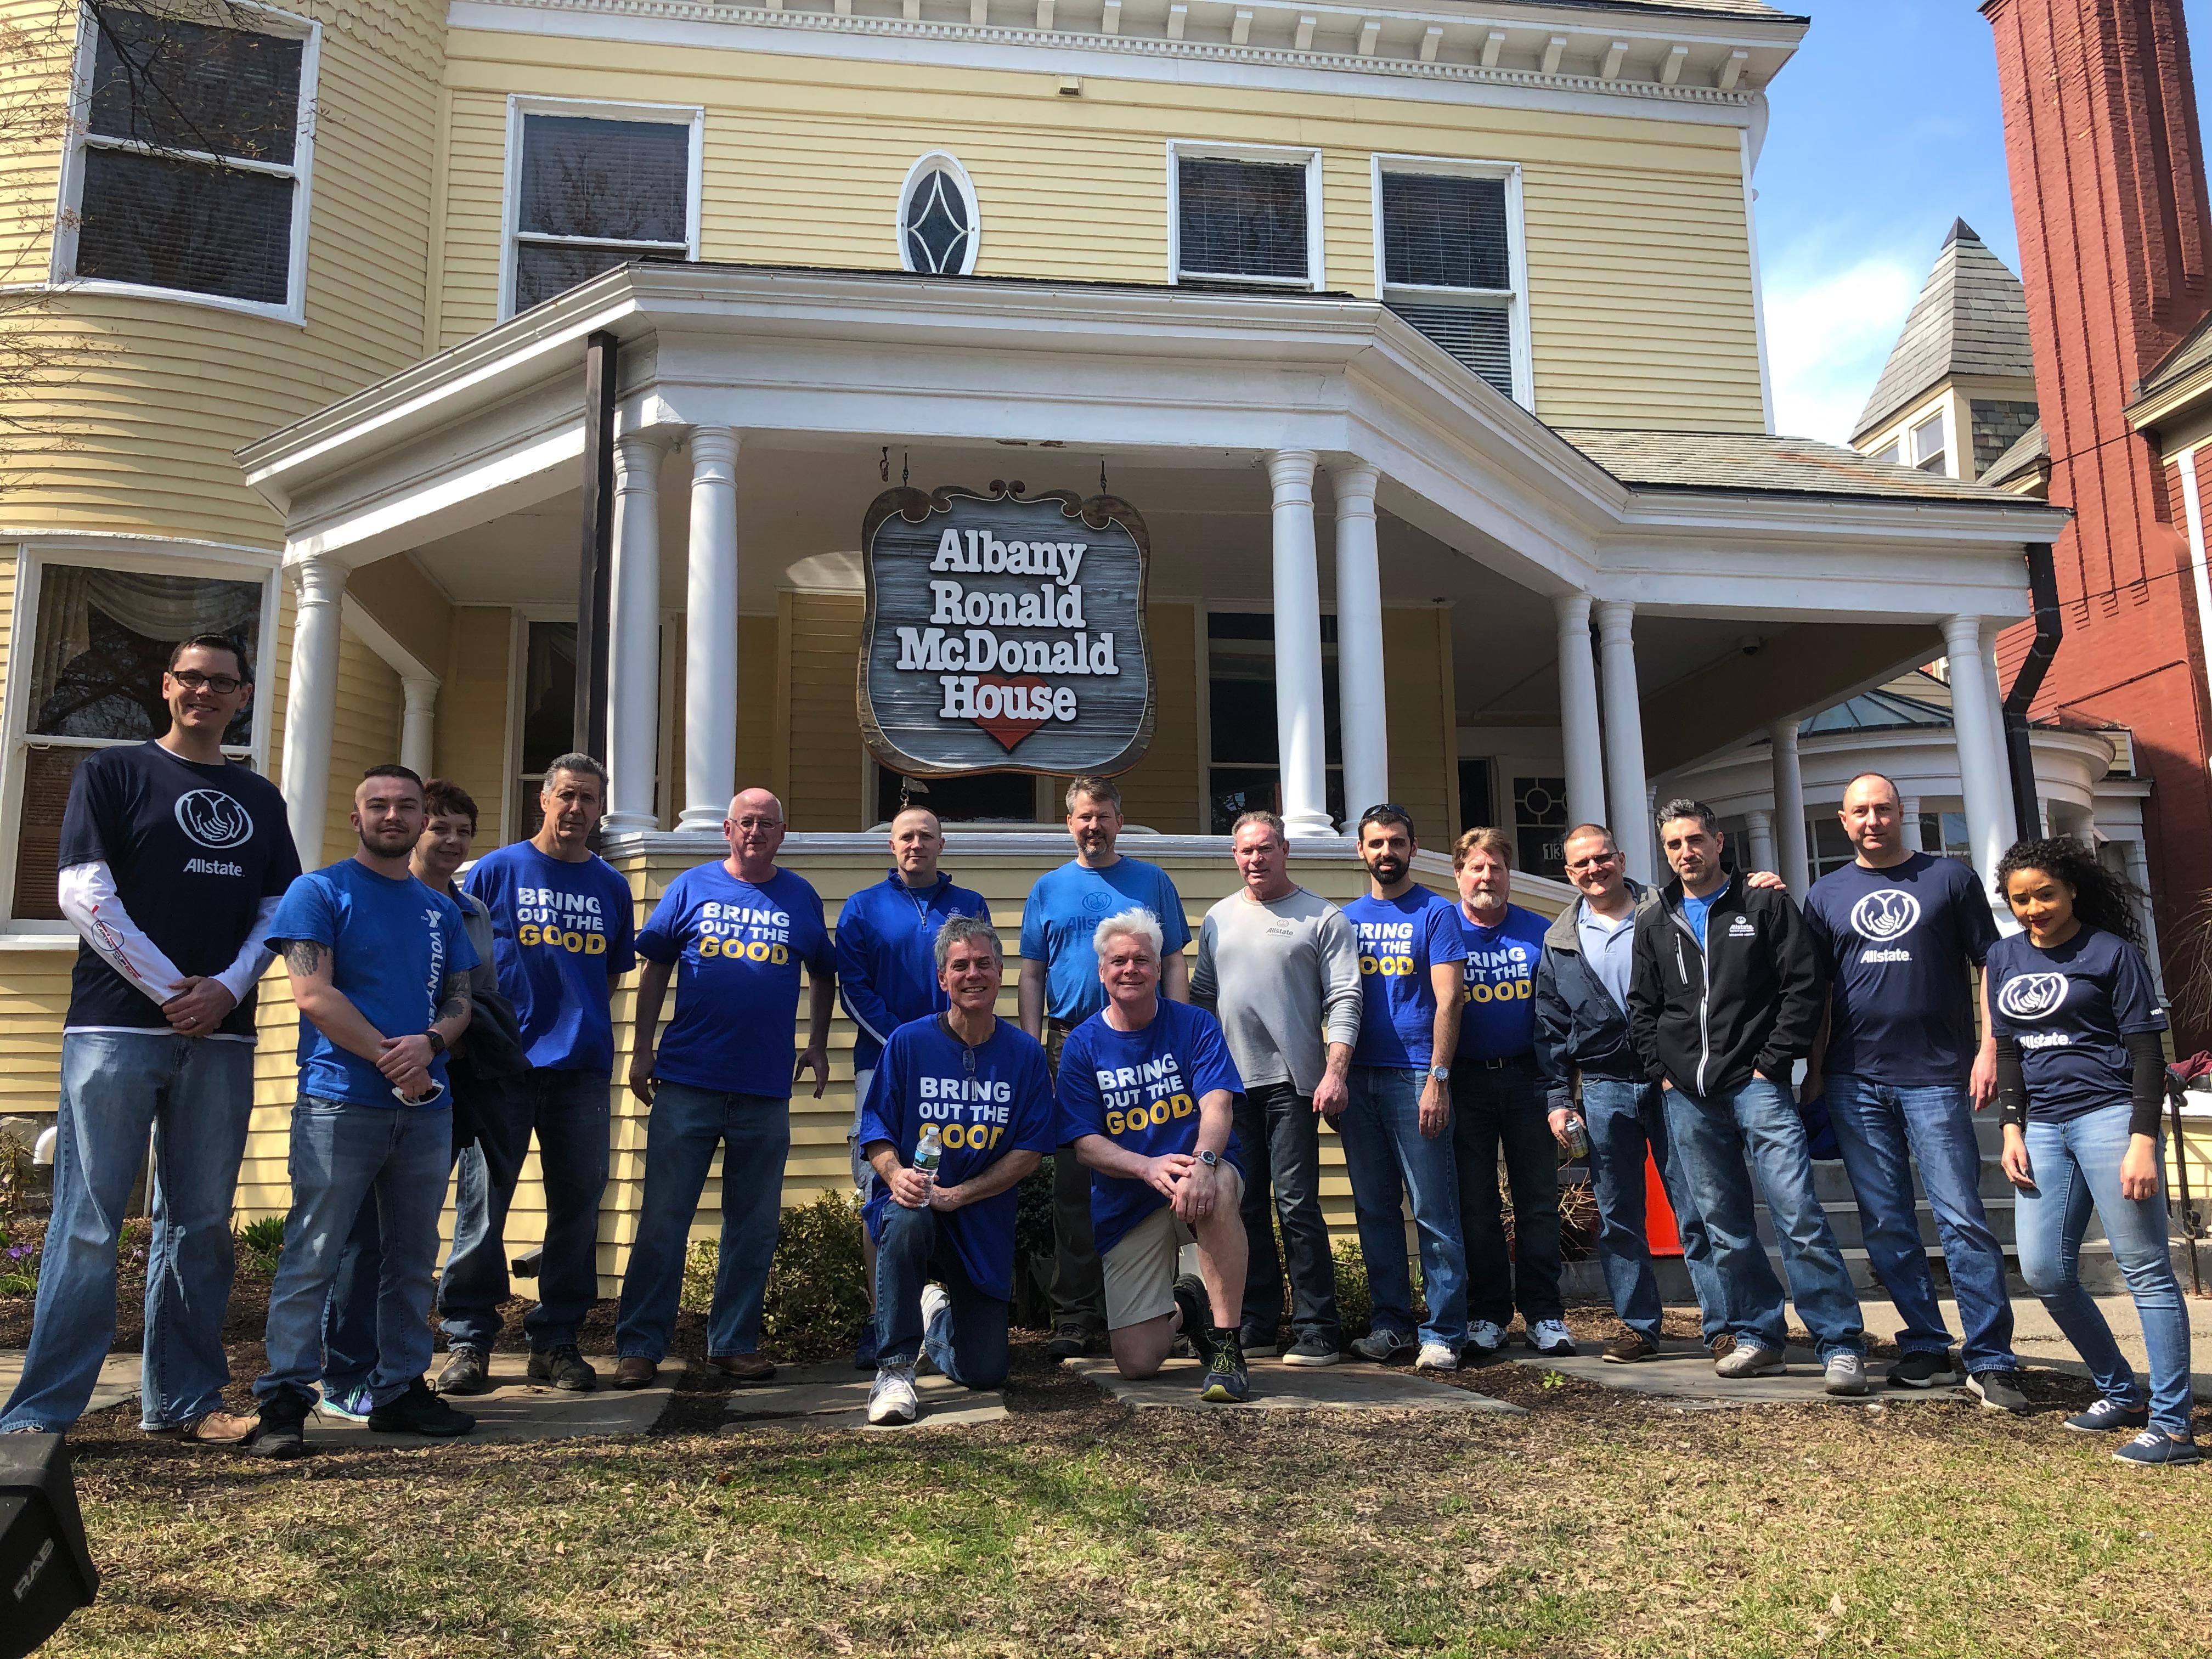 Our Allstate agency was proud to partner with others to raise money and assist others at the Ronald McDonald House in Albany.